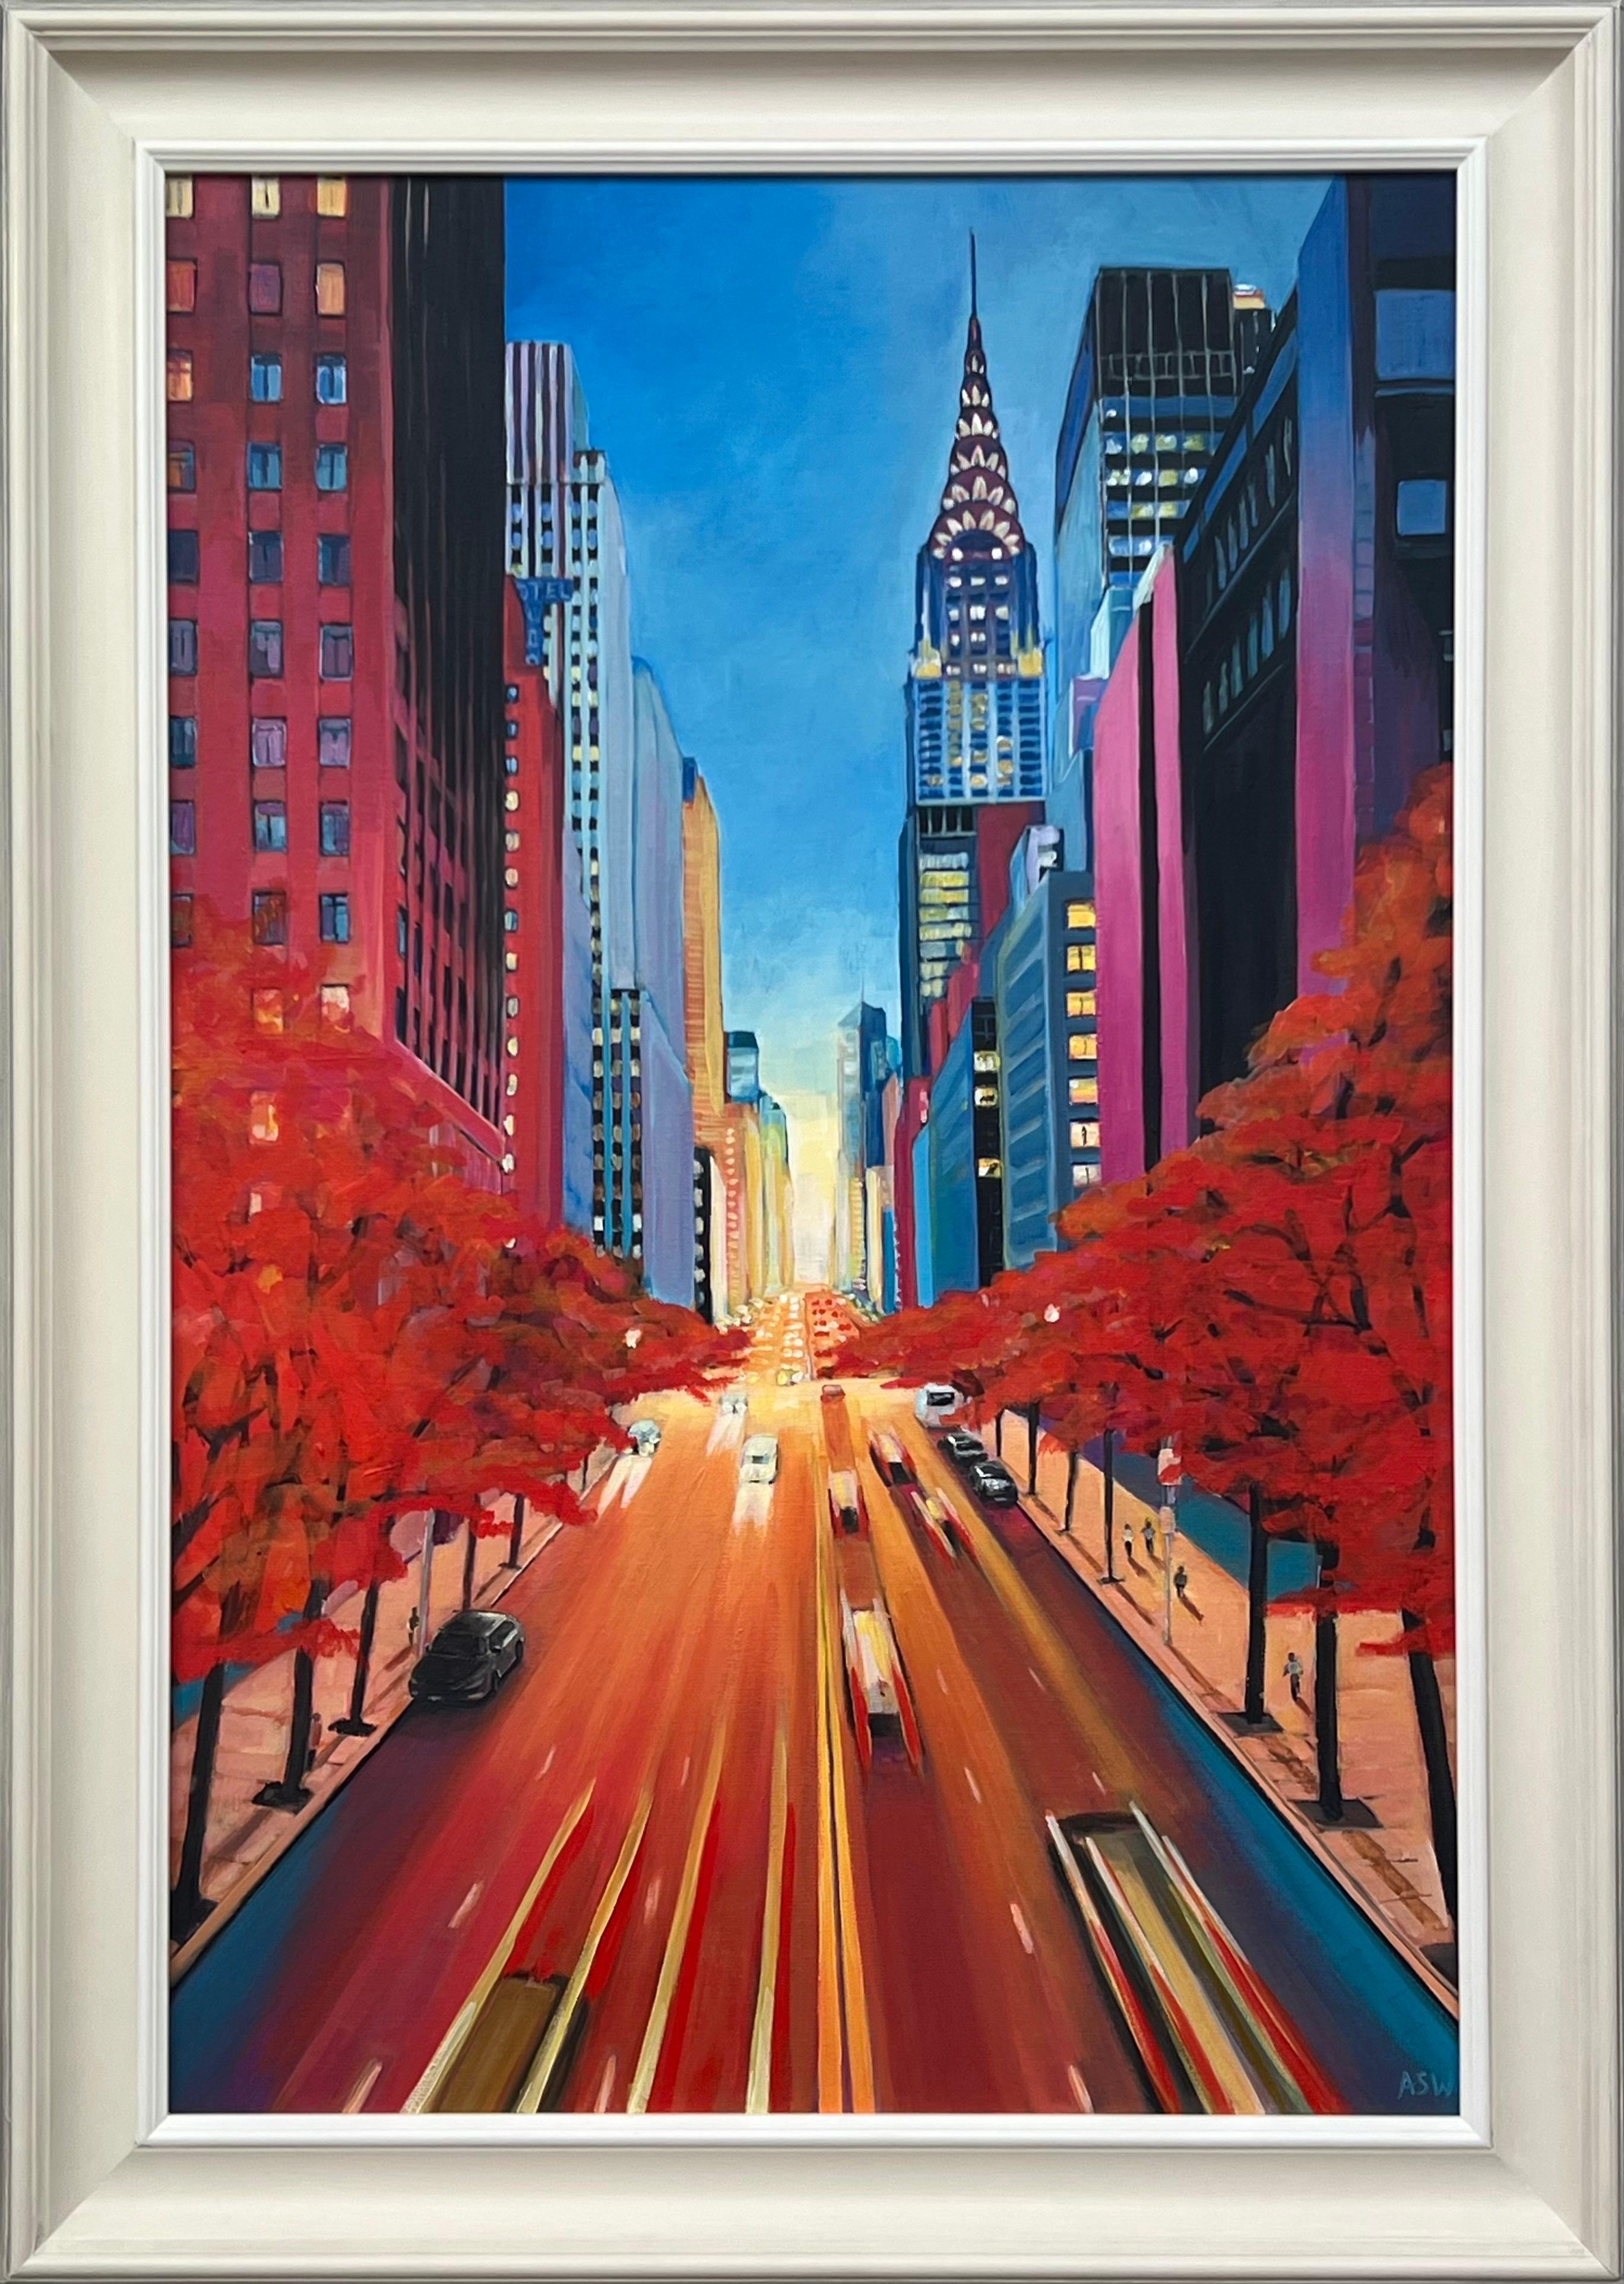 Angela Wakefield Landscape Painting - Painting of the Chrysler Building 42nd Street New York City by British Artist